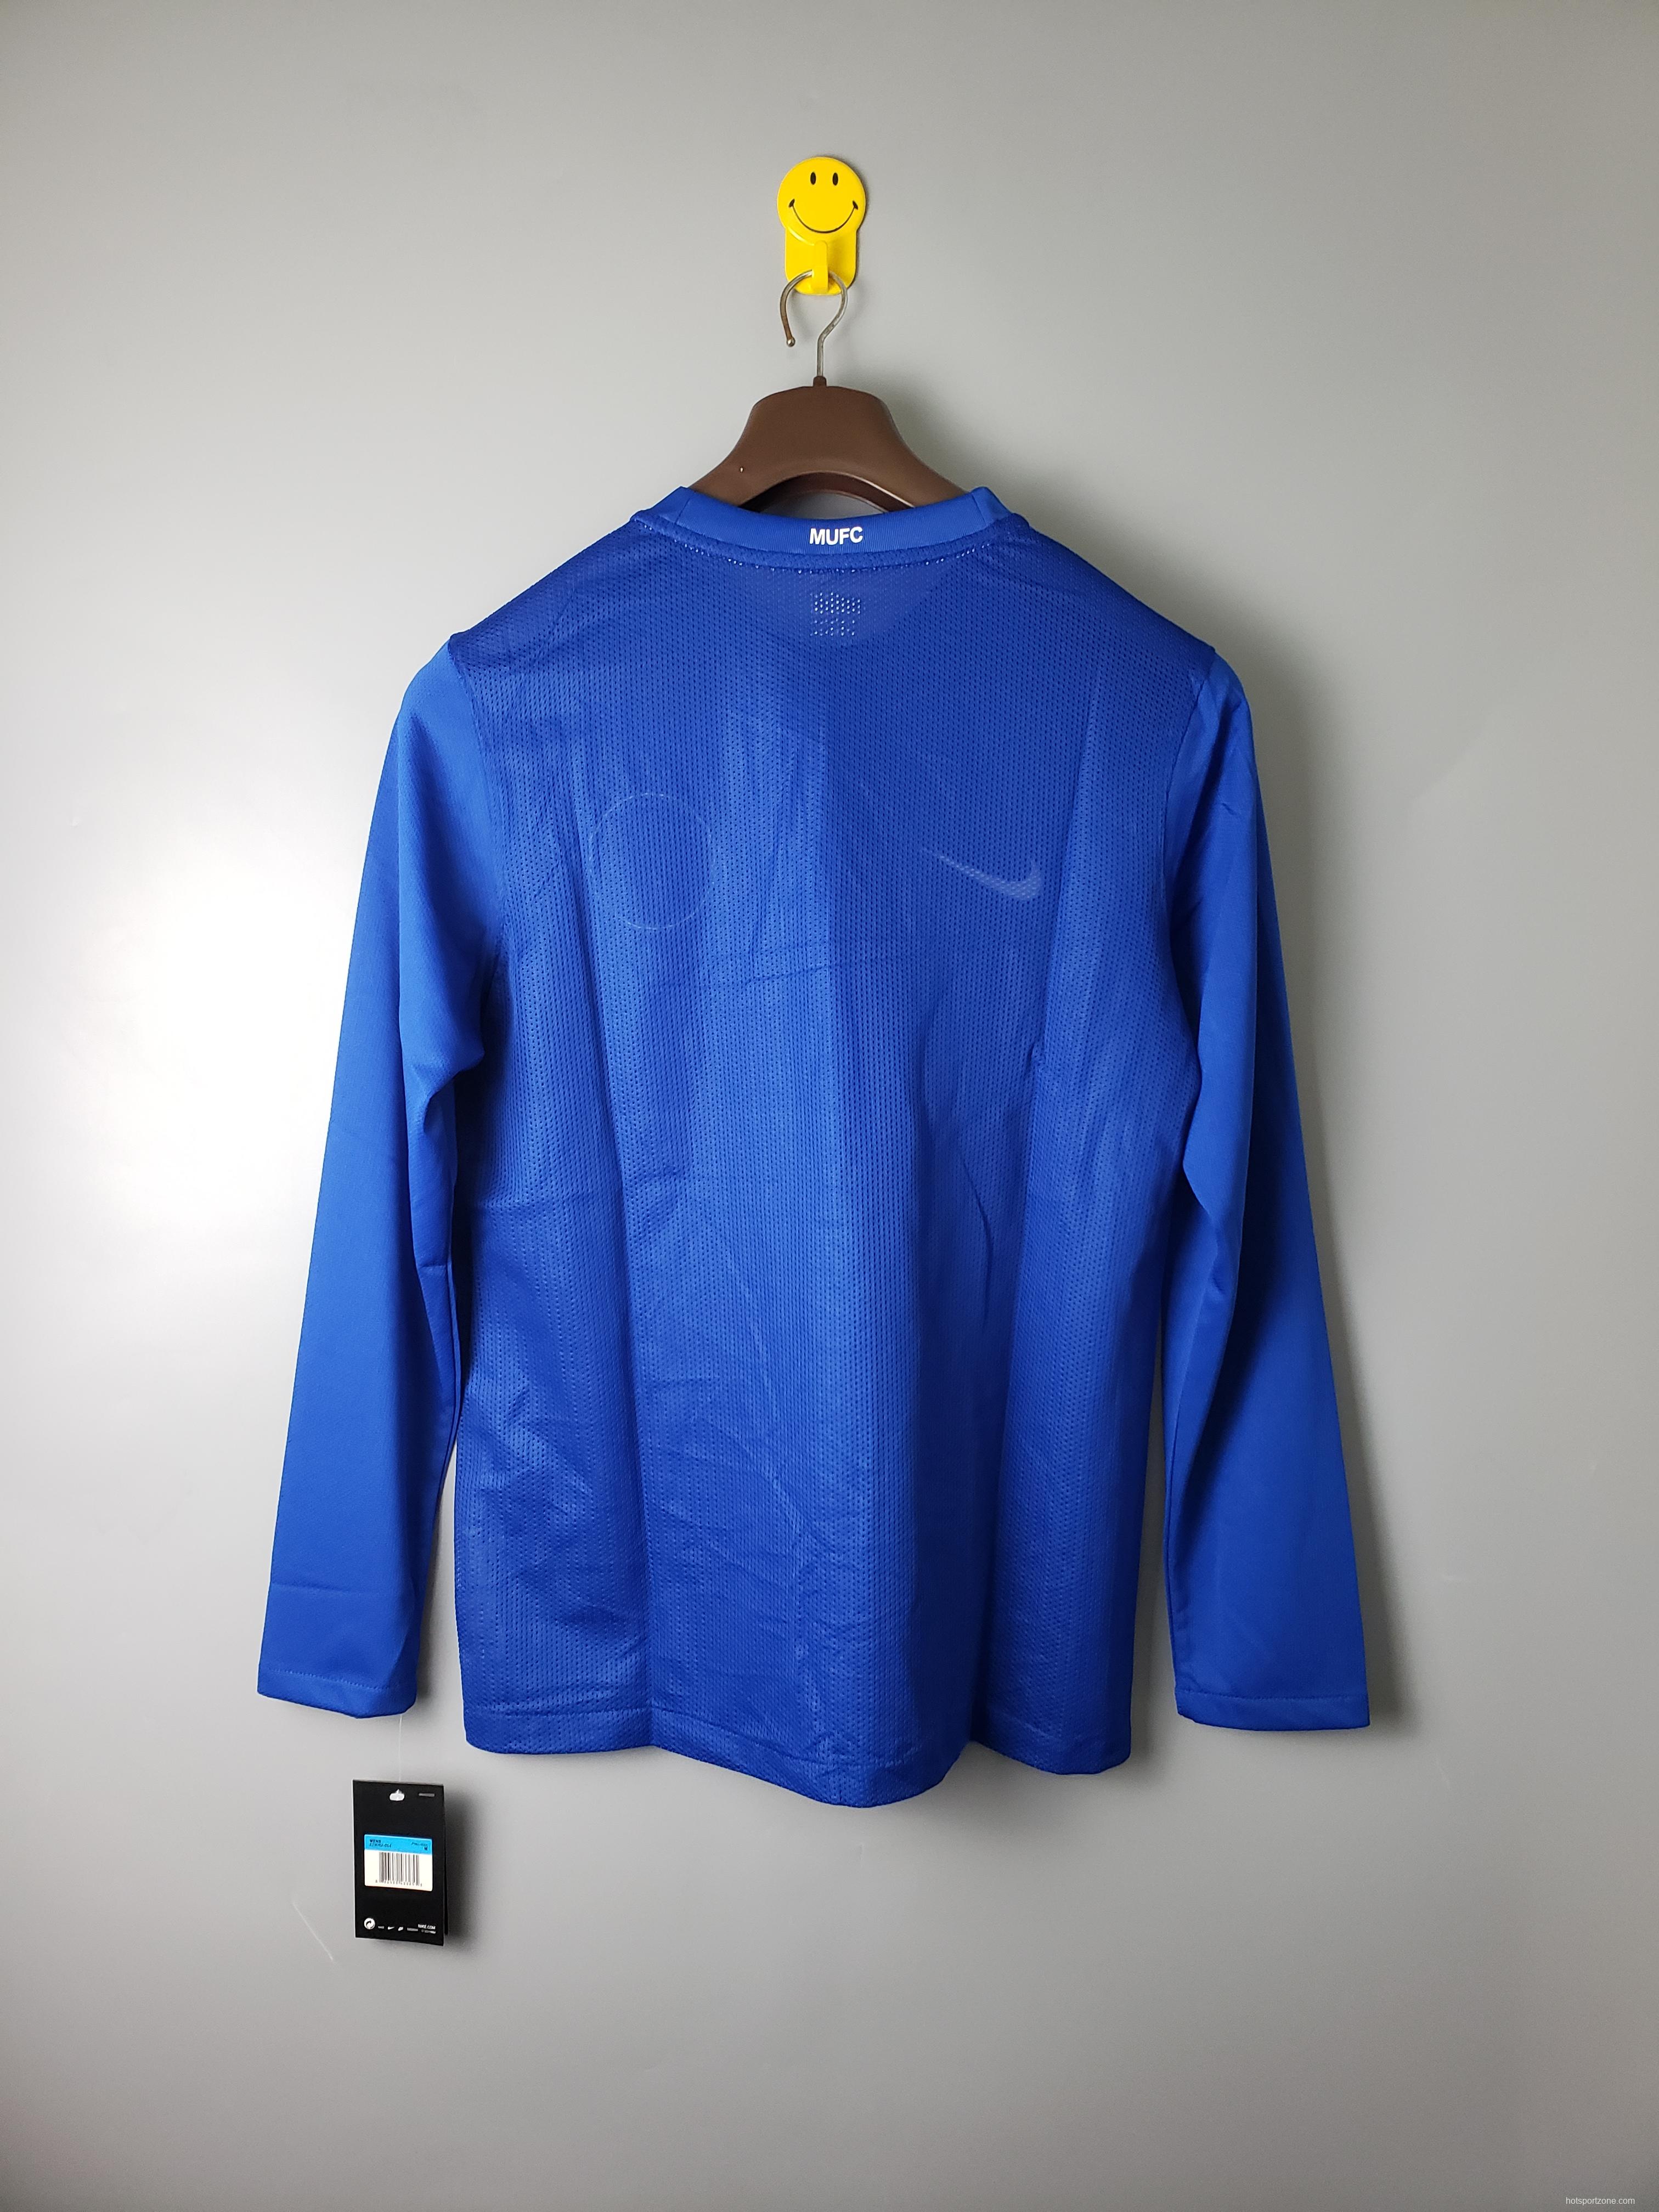 Retro 08/09 Manchester United Third Blue long sleeve Soccer Jersey